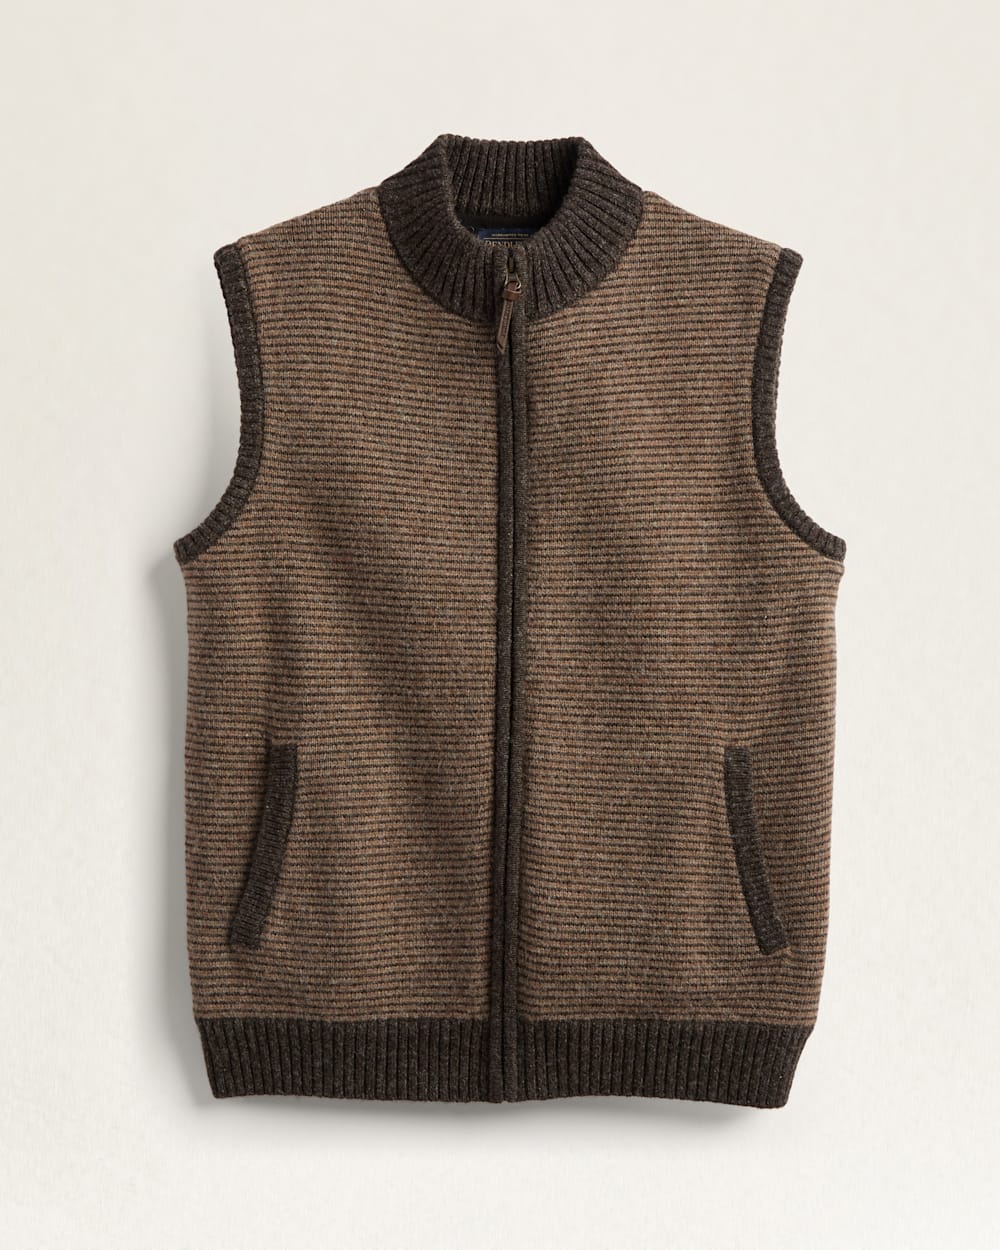 MEN'S SHETLAND COLLECTION SWEATER VEST IN MAHOGANY/TAUPE image number 1